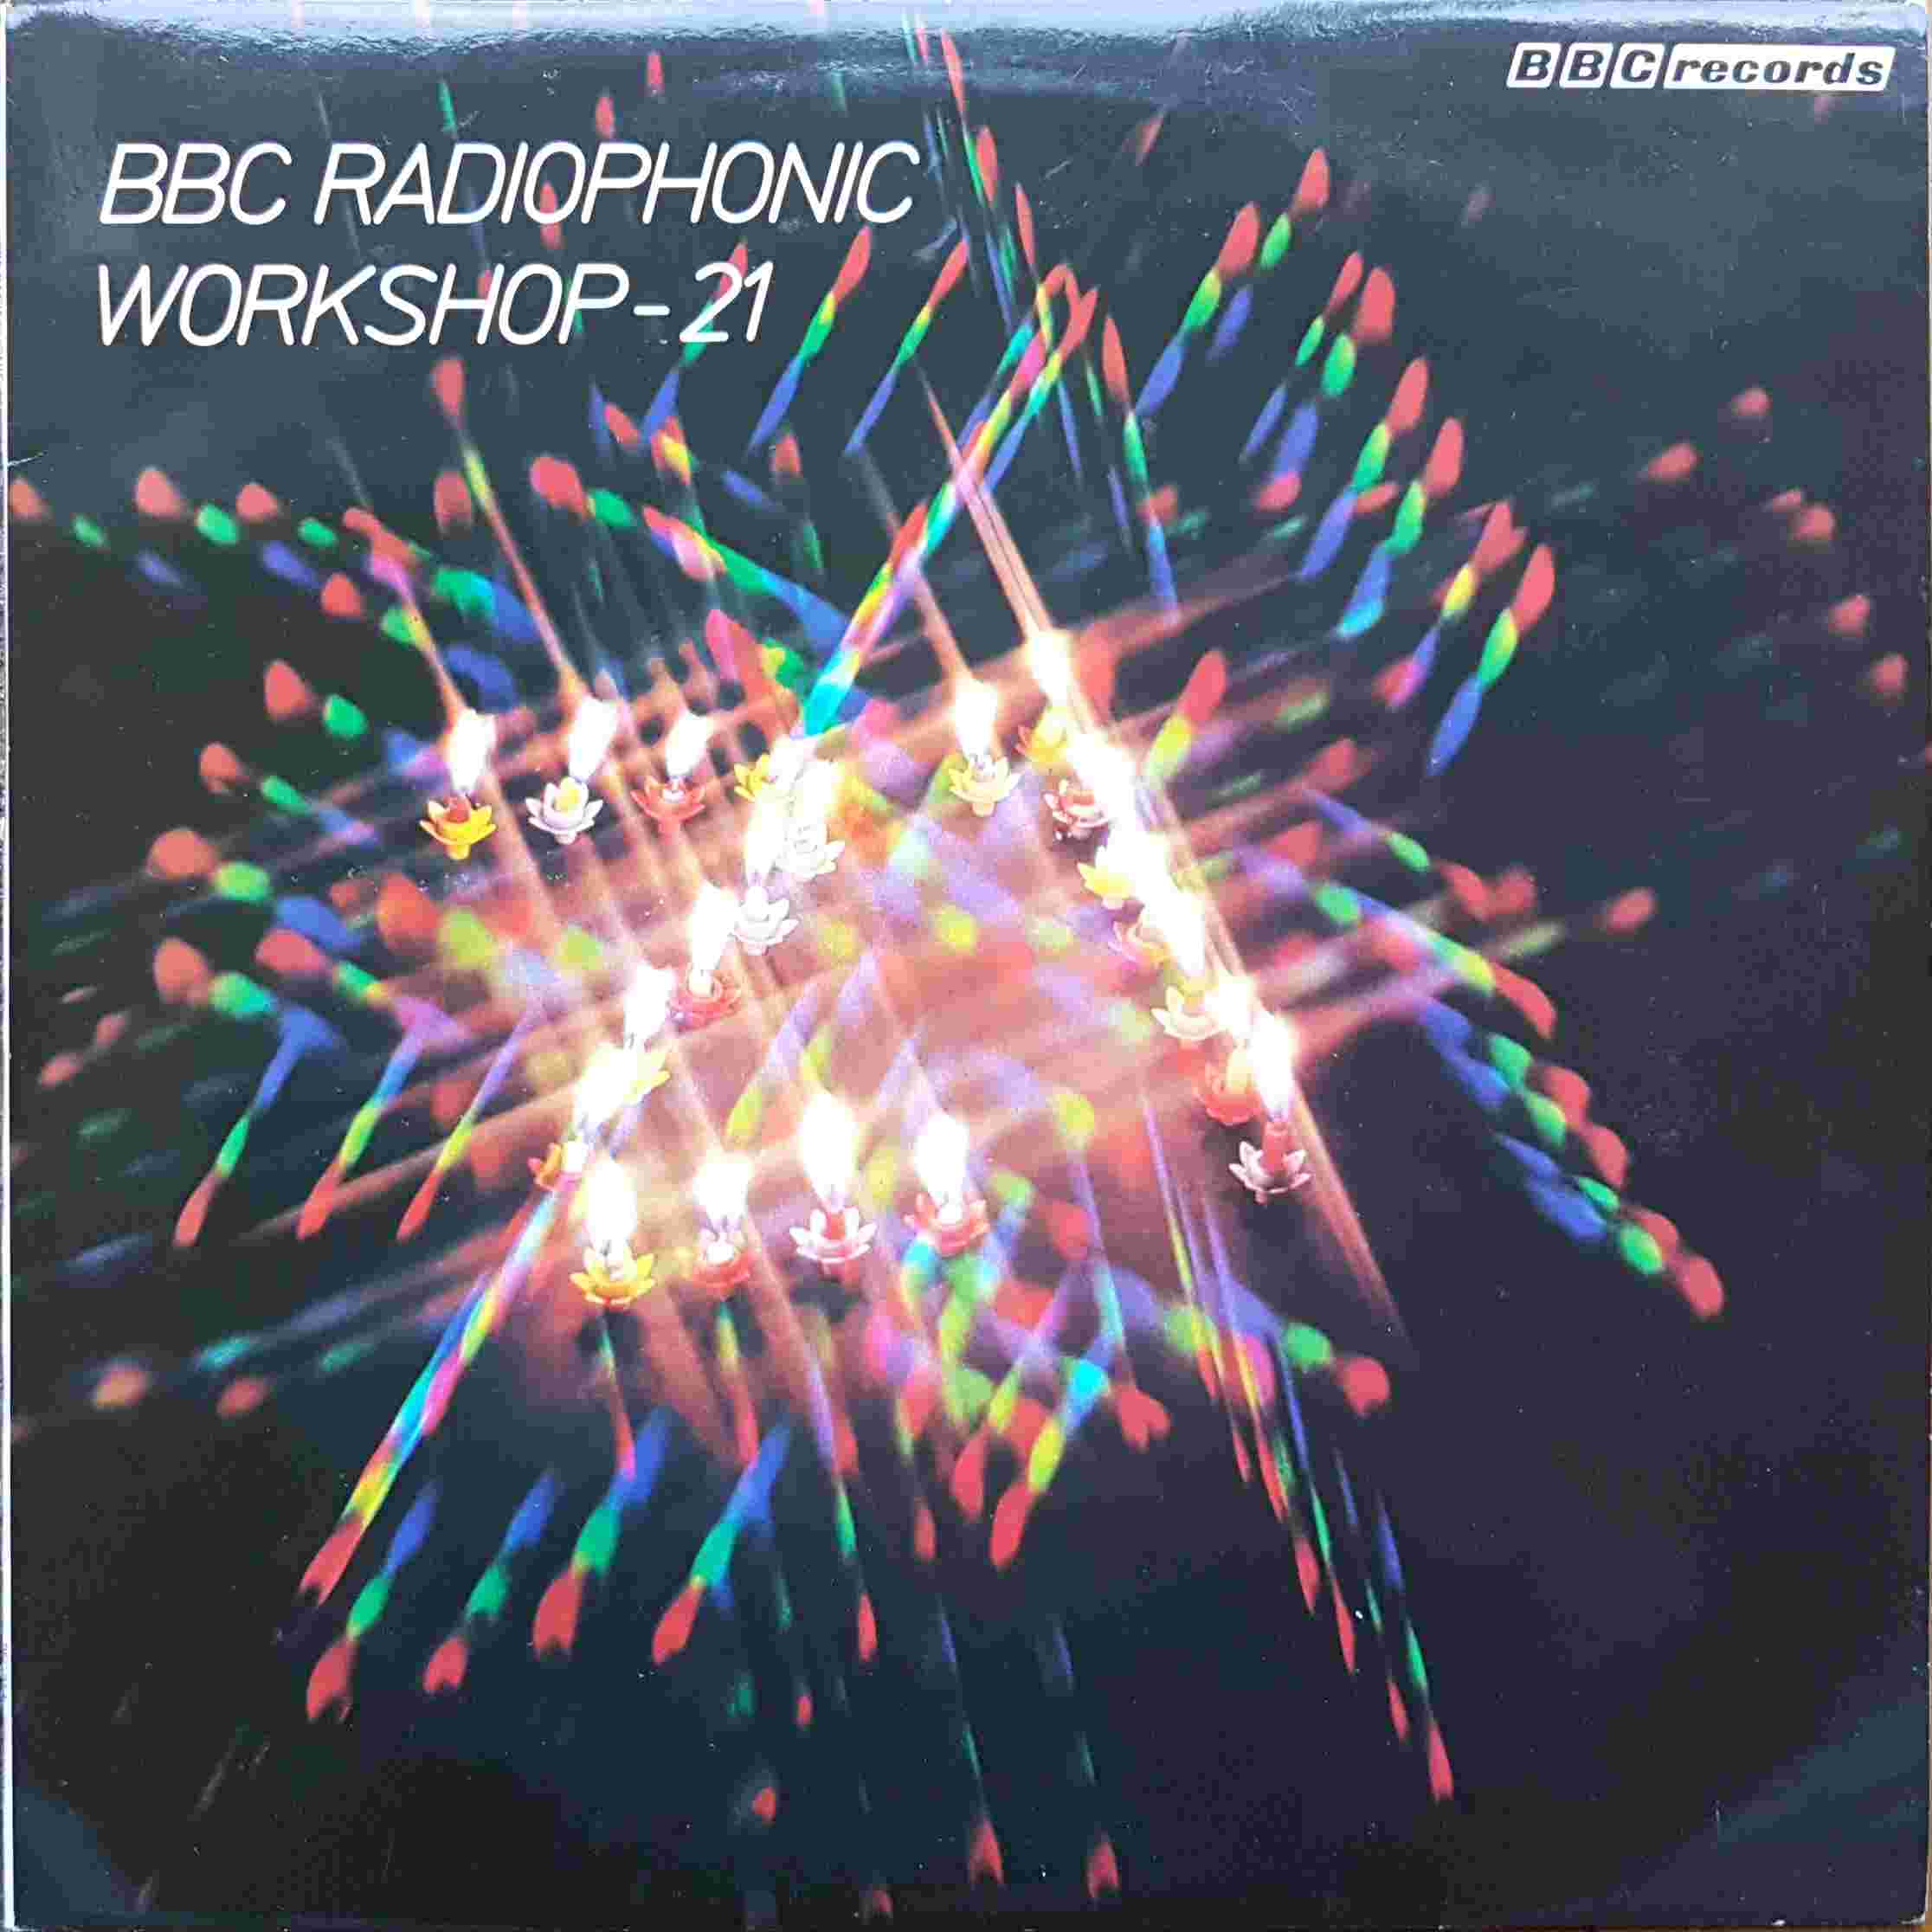 Picture of REC 354 BBC radiophonic workshop - 21 by artist BBC radiophonic workshop from the BBC albums - Records and Tapes library